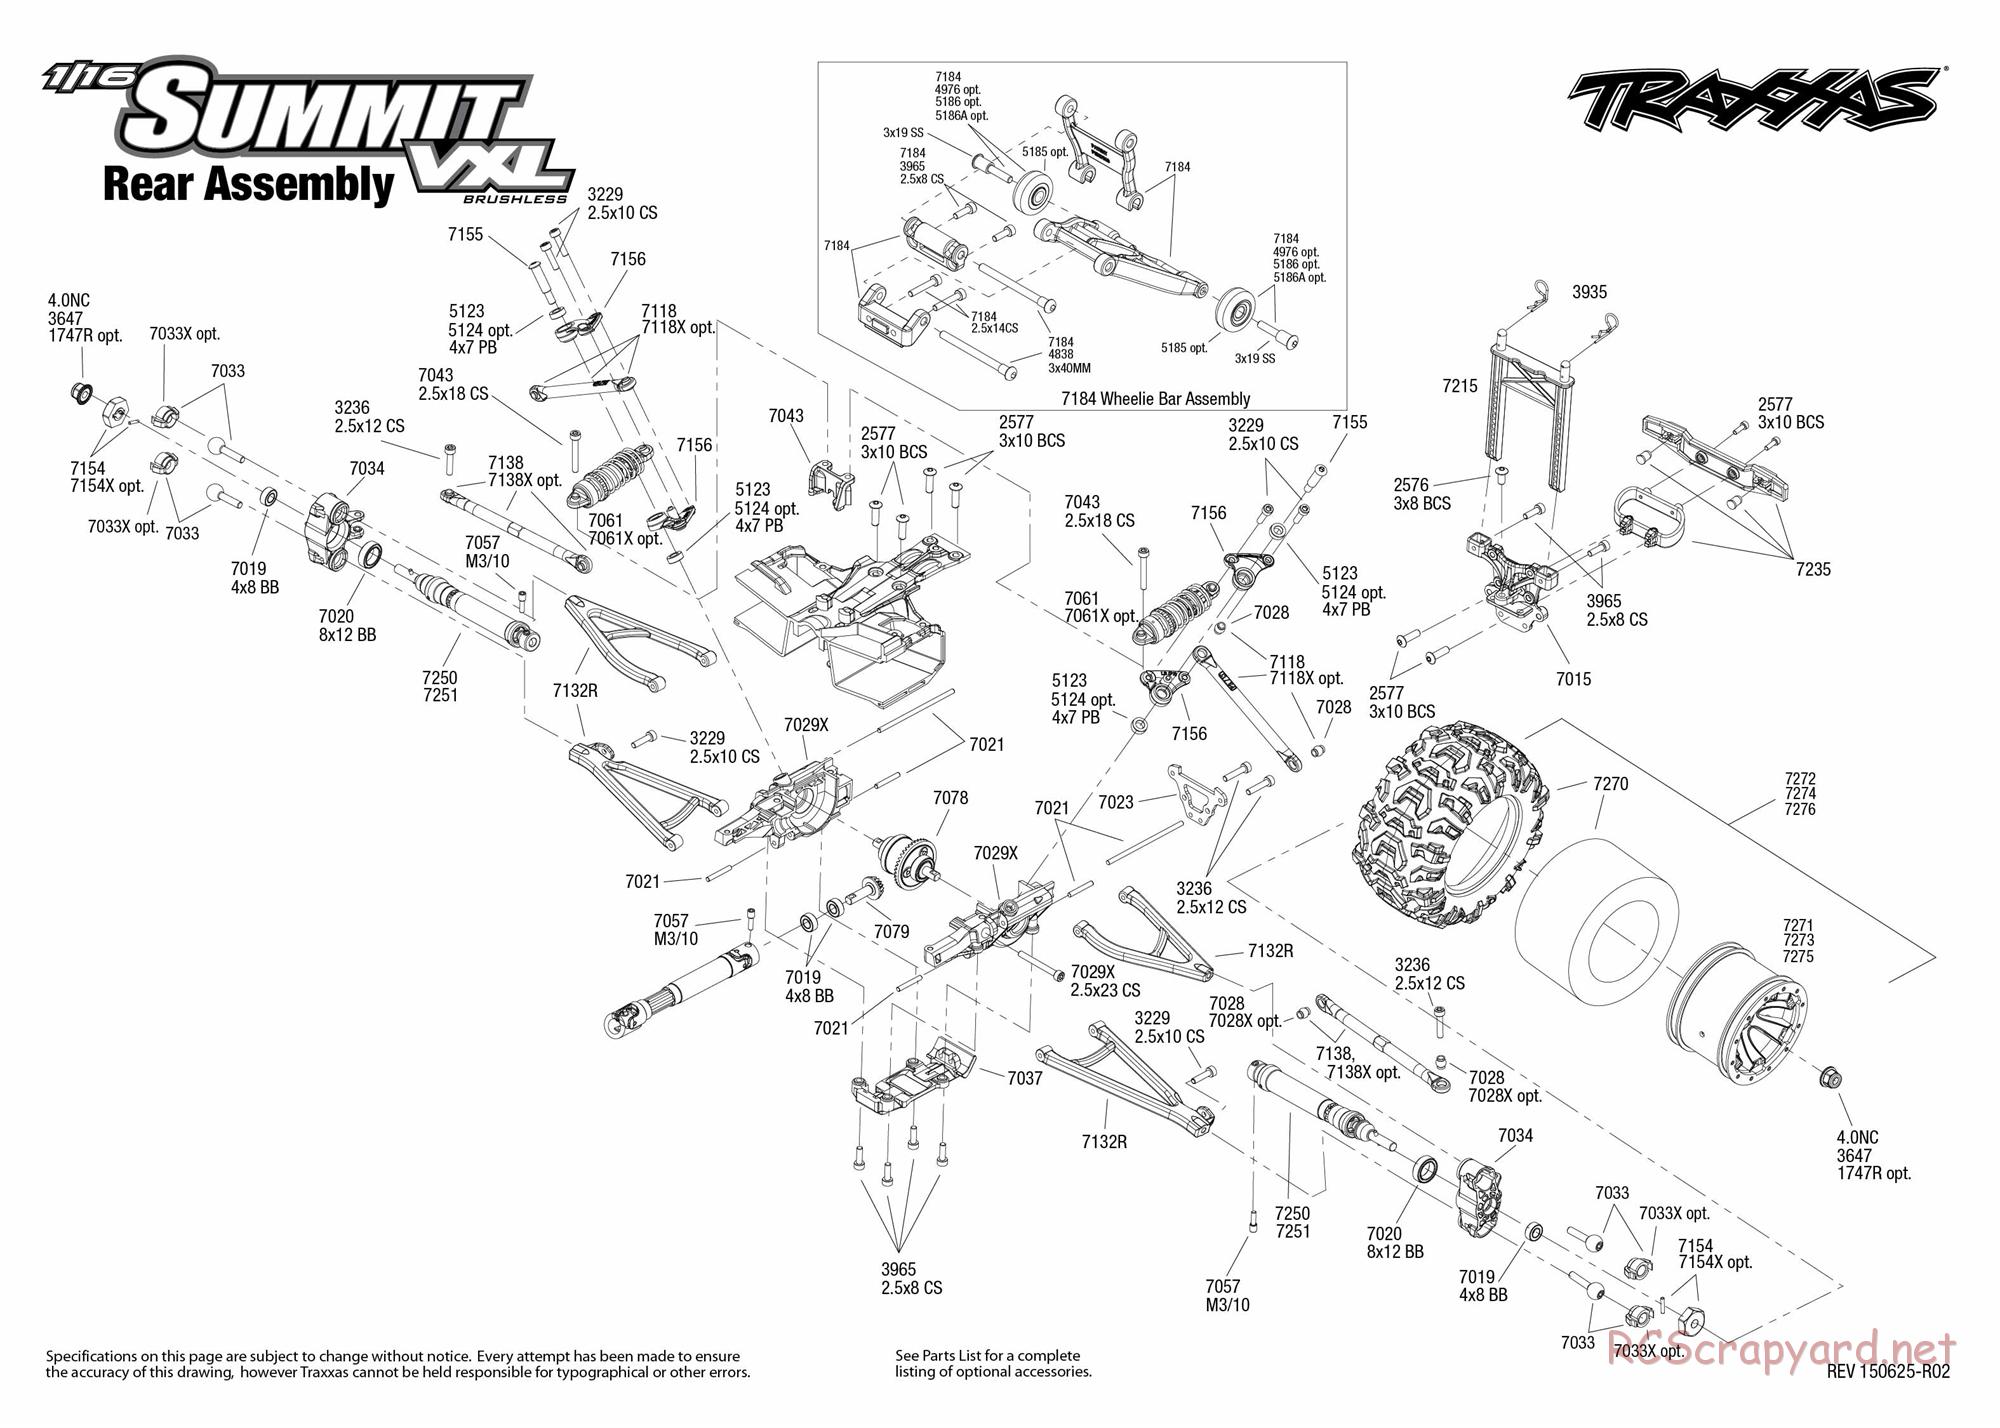 Traxxas - 1/16 Summit VXL (2015) - Exploded Views - Page 4